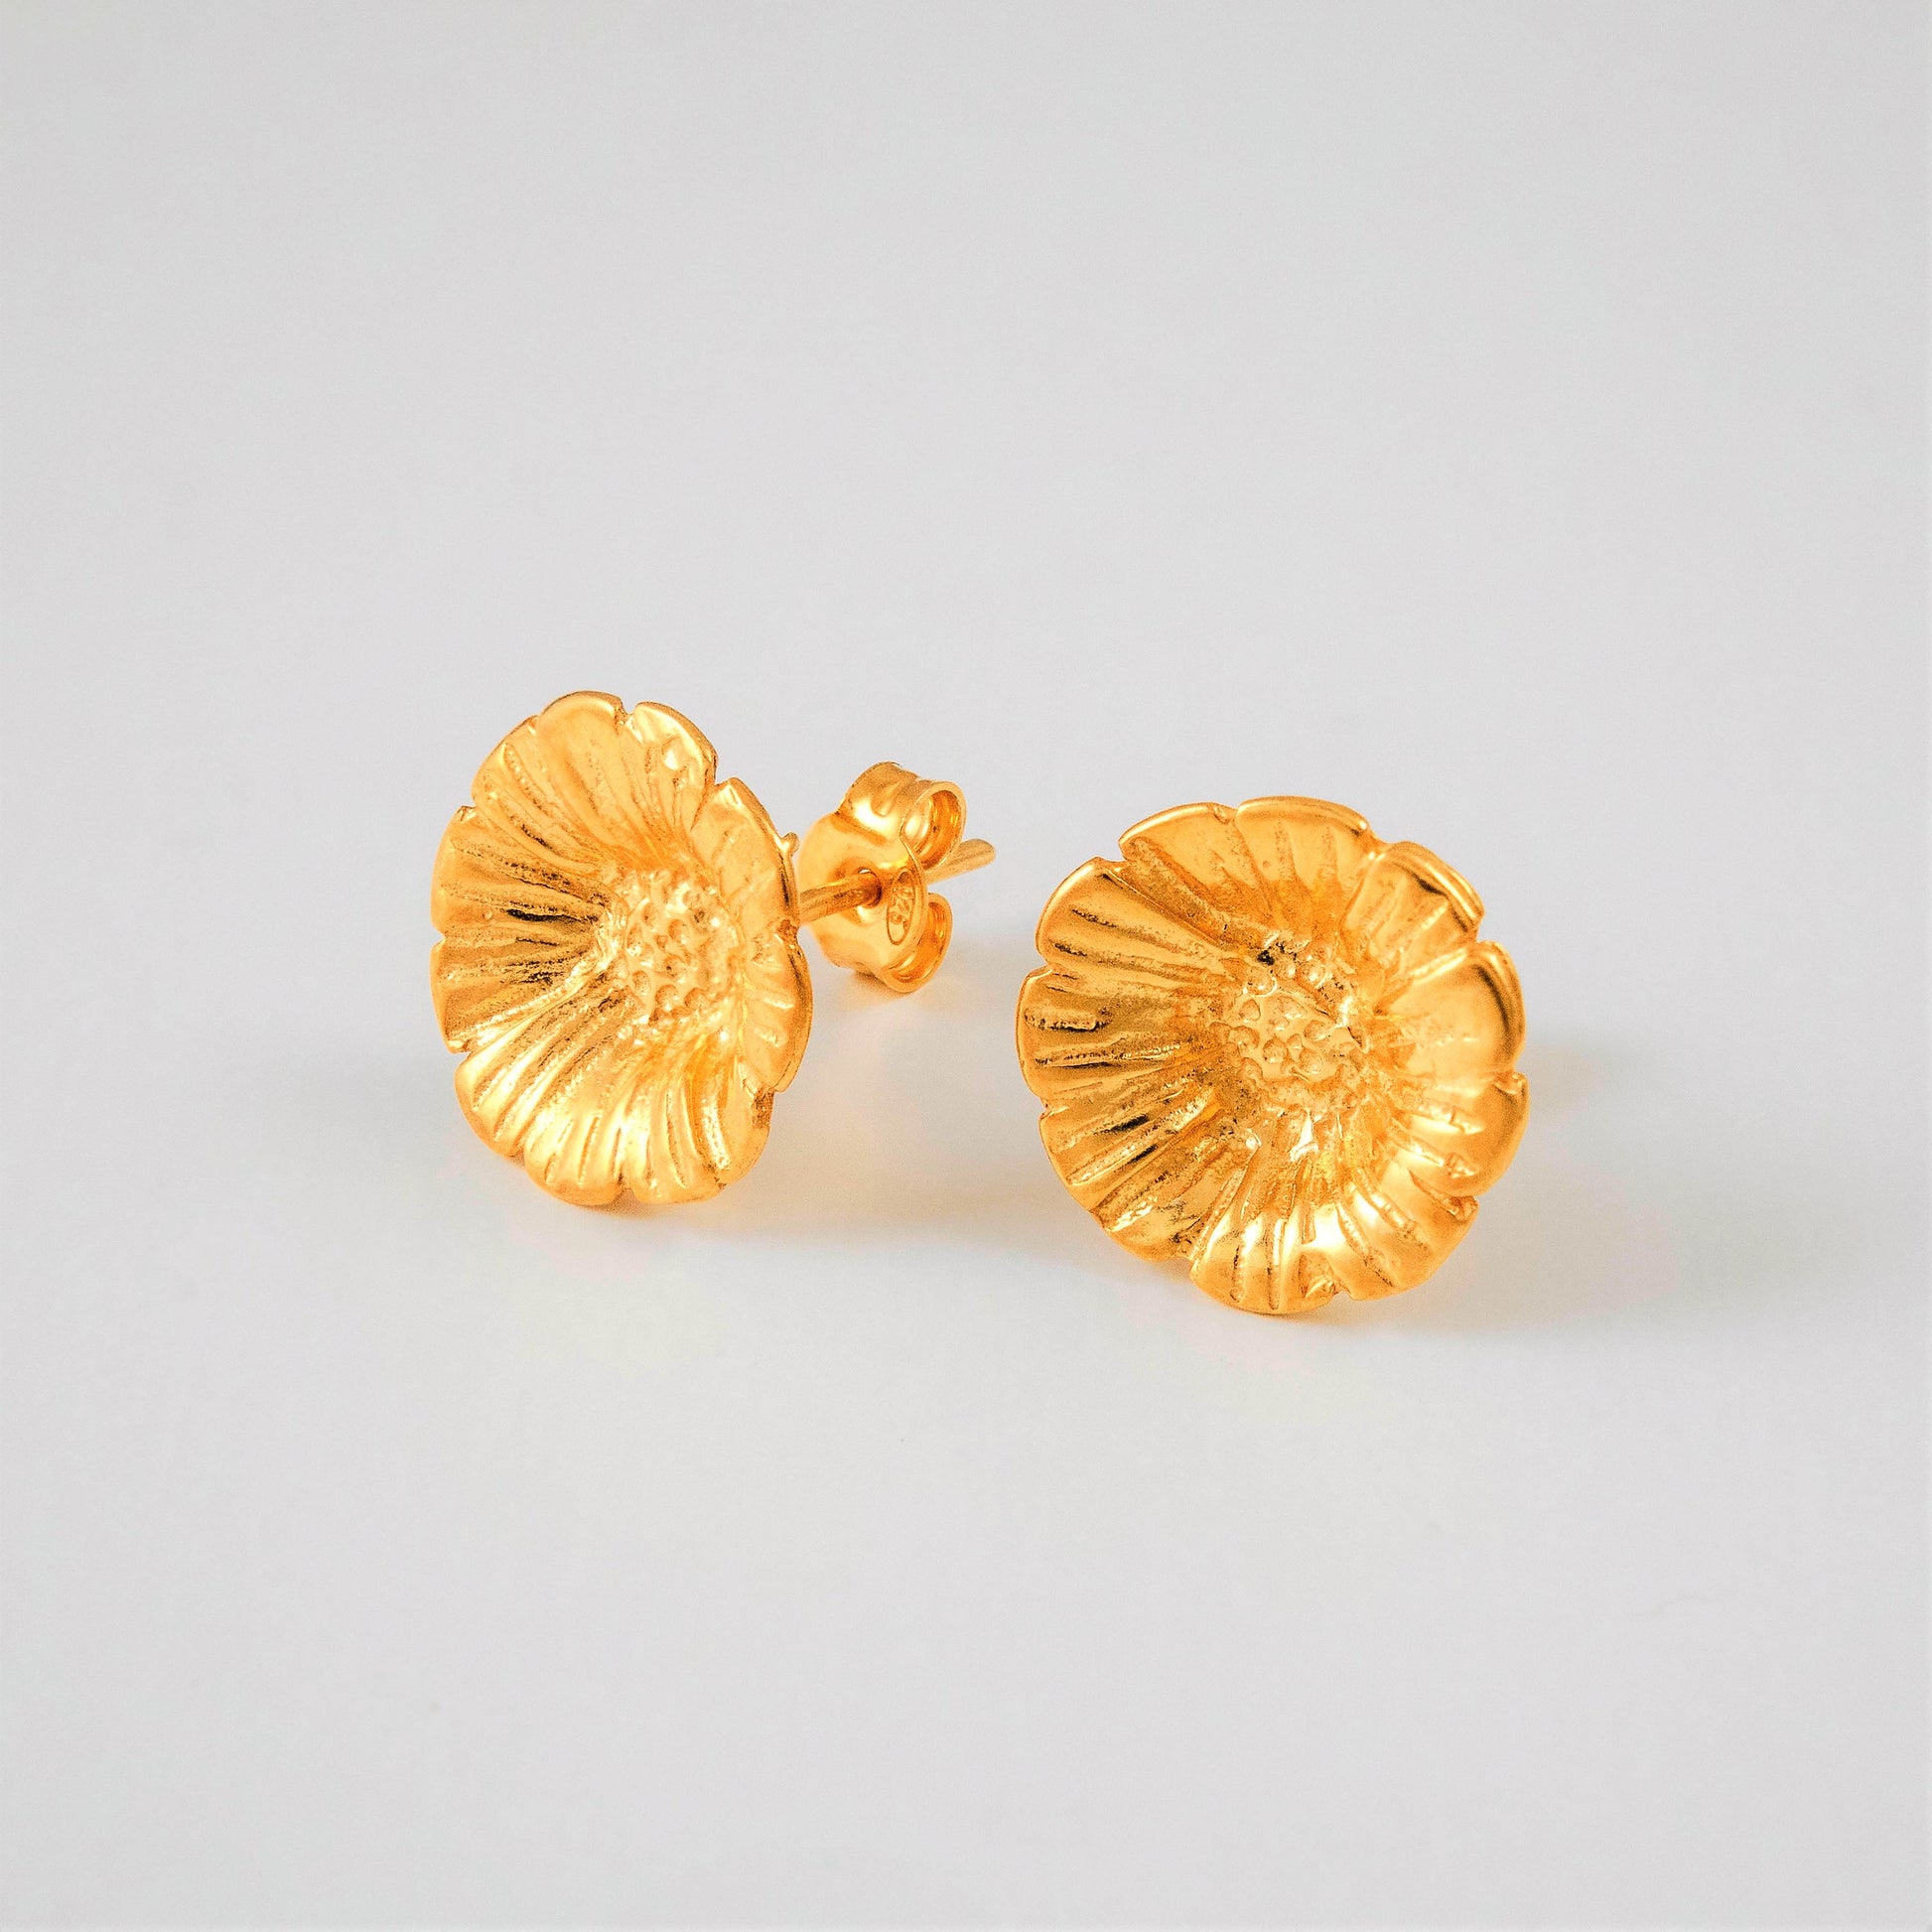 Tiny  gold plated stud earrings with anemones. -